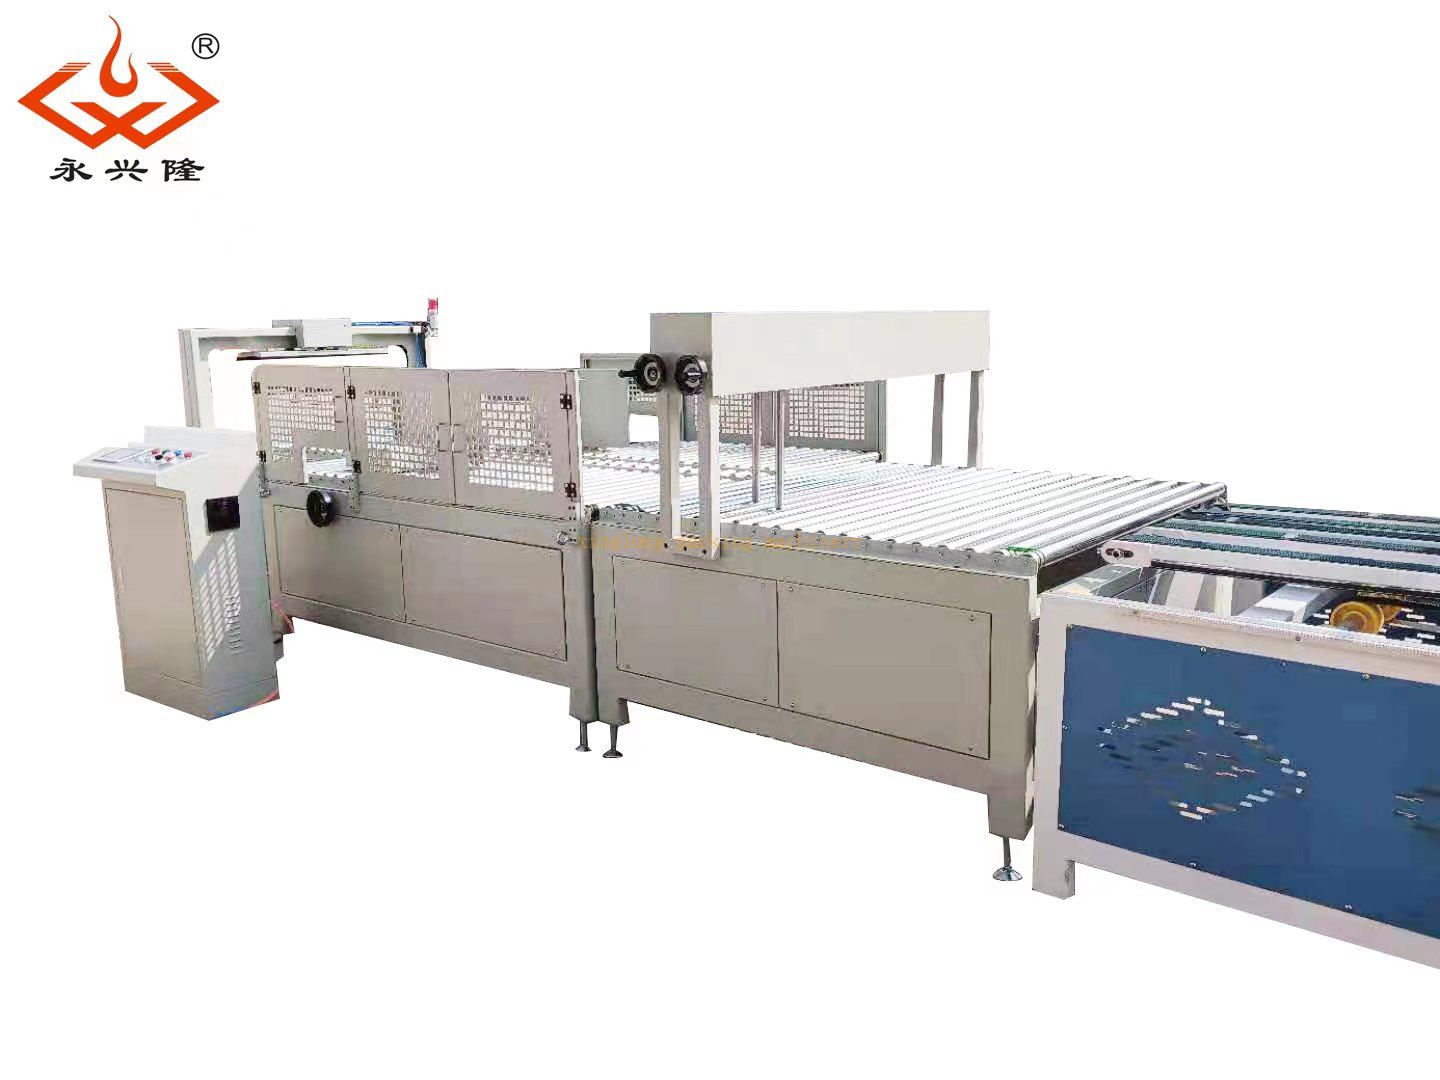 AFG Series Automatic folder gluer machine with Automatic PP strapping machine